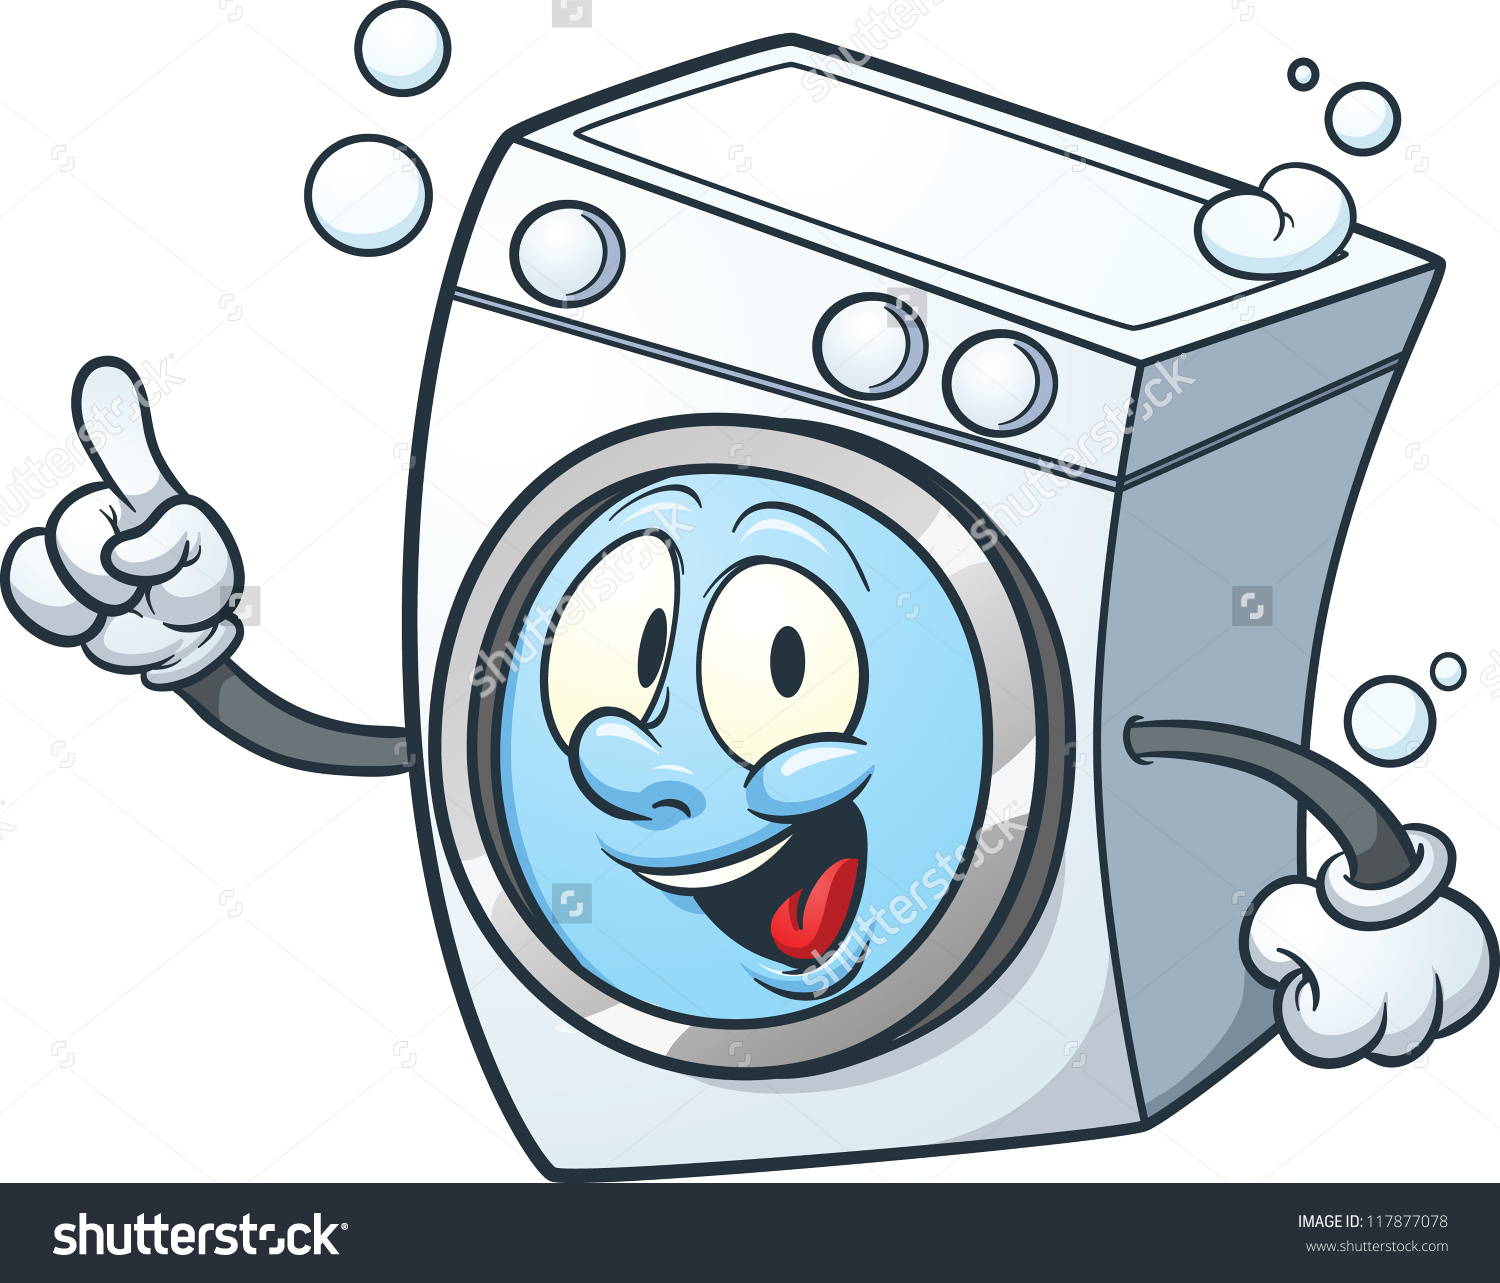 Washing Machine Clipart. Save to a lightbox